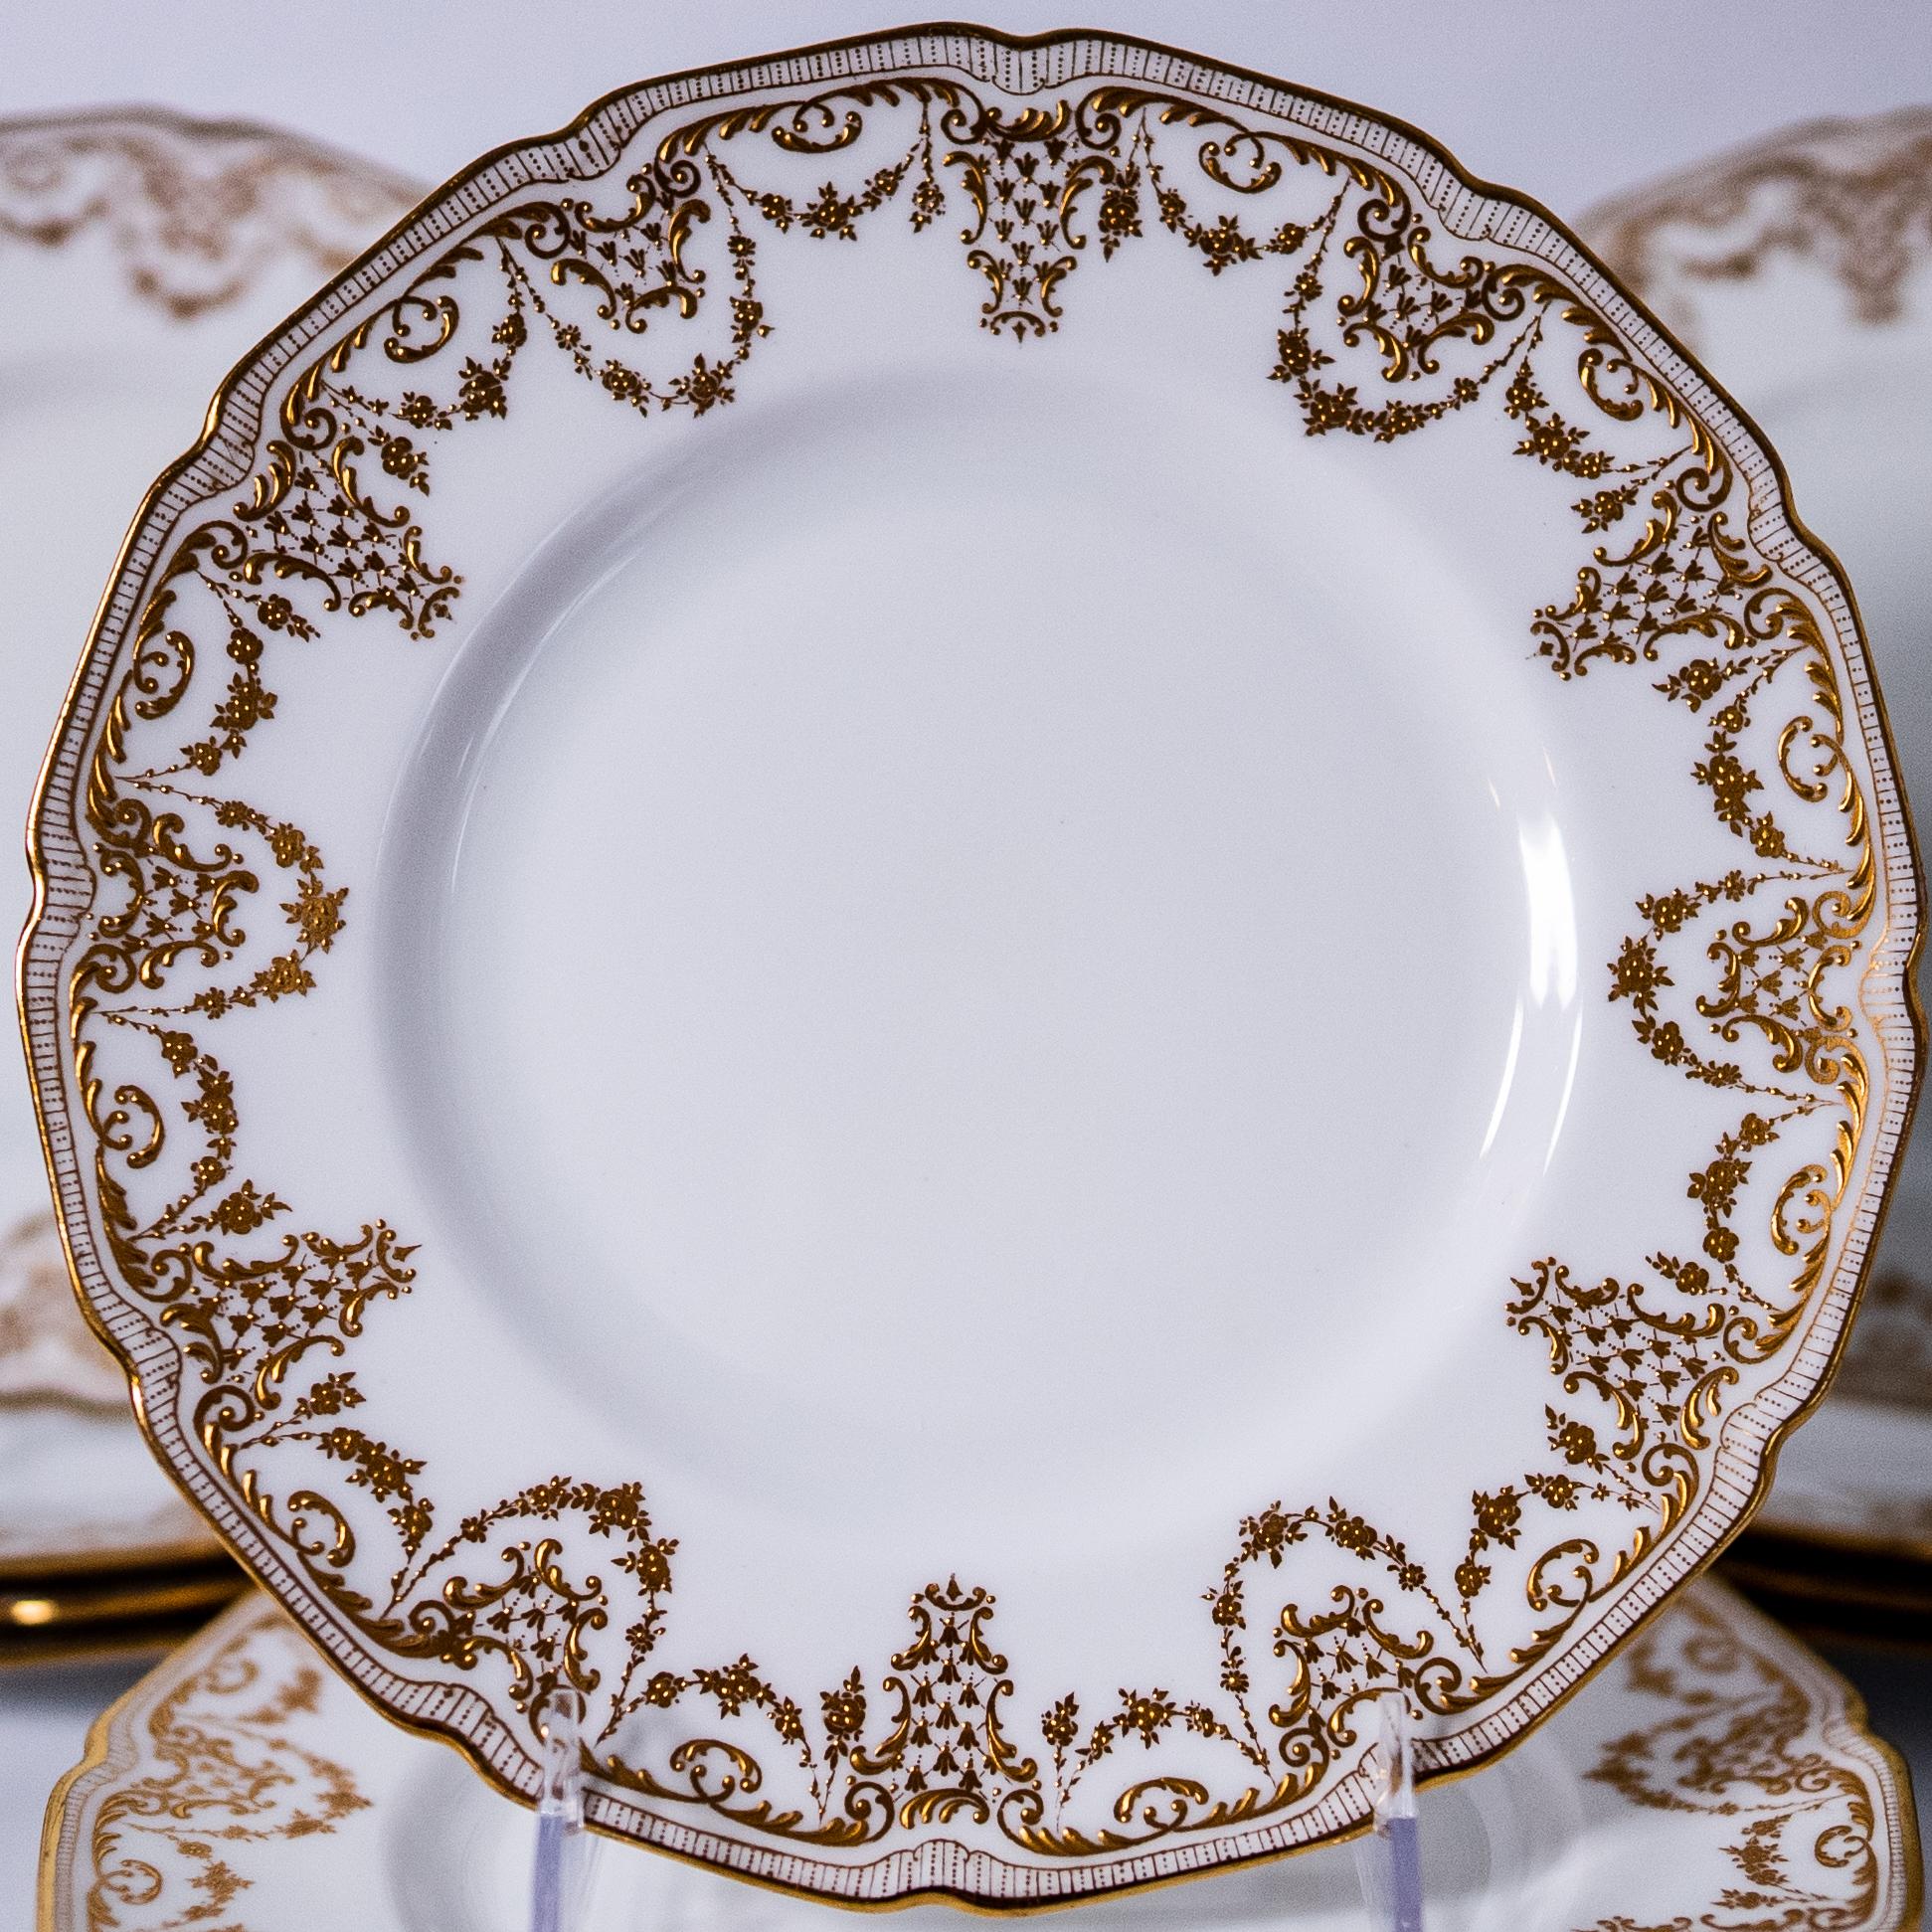 A great set and classic shape from Royal Doulton custom ordered through the fine Gilded Age Retailer: Burley & Co Chicago. These plates feature a crisp white background and are also trimmed in 24 karat gold. In really nice antique condition.